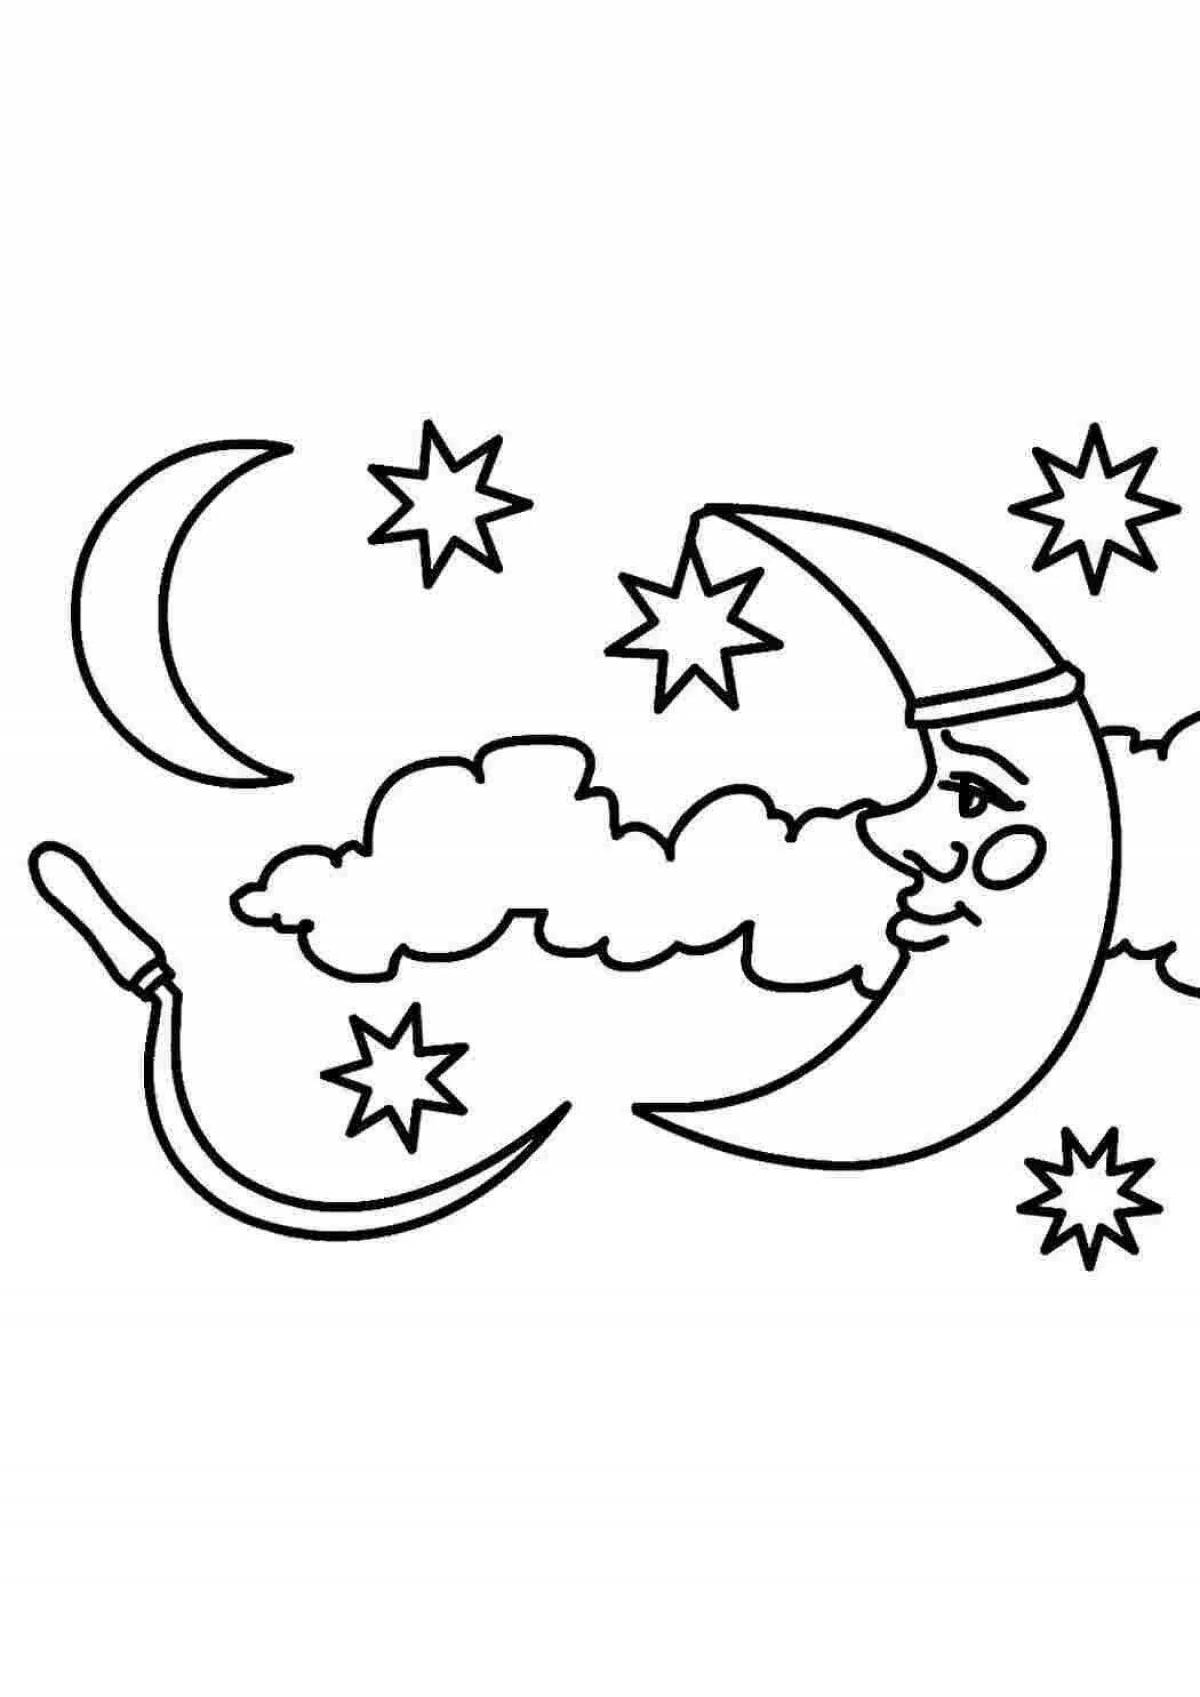 Adorable crescent moon coloring page